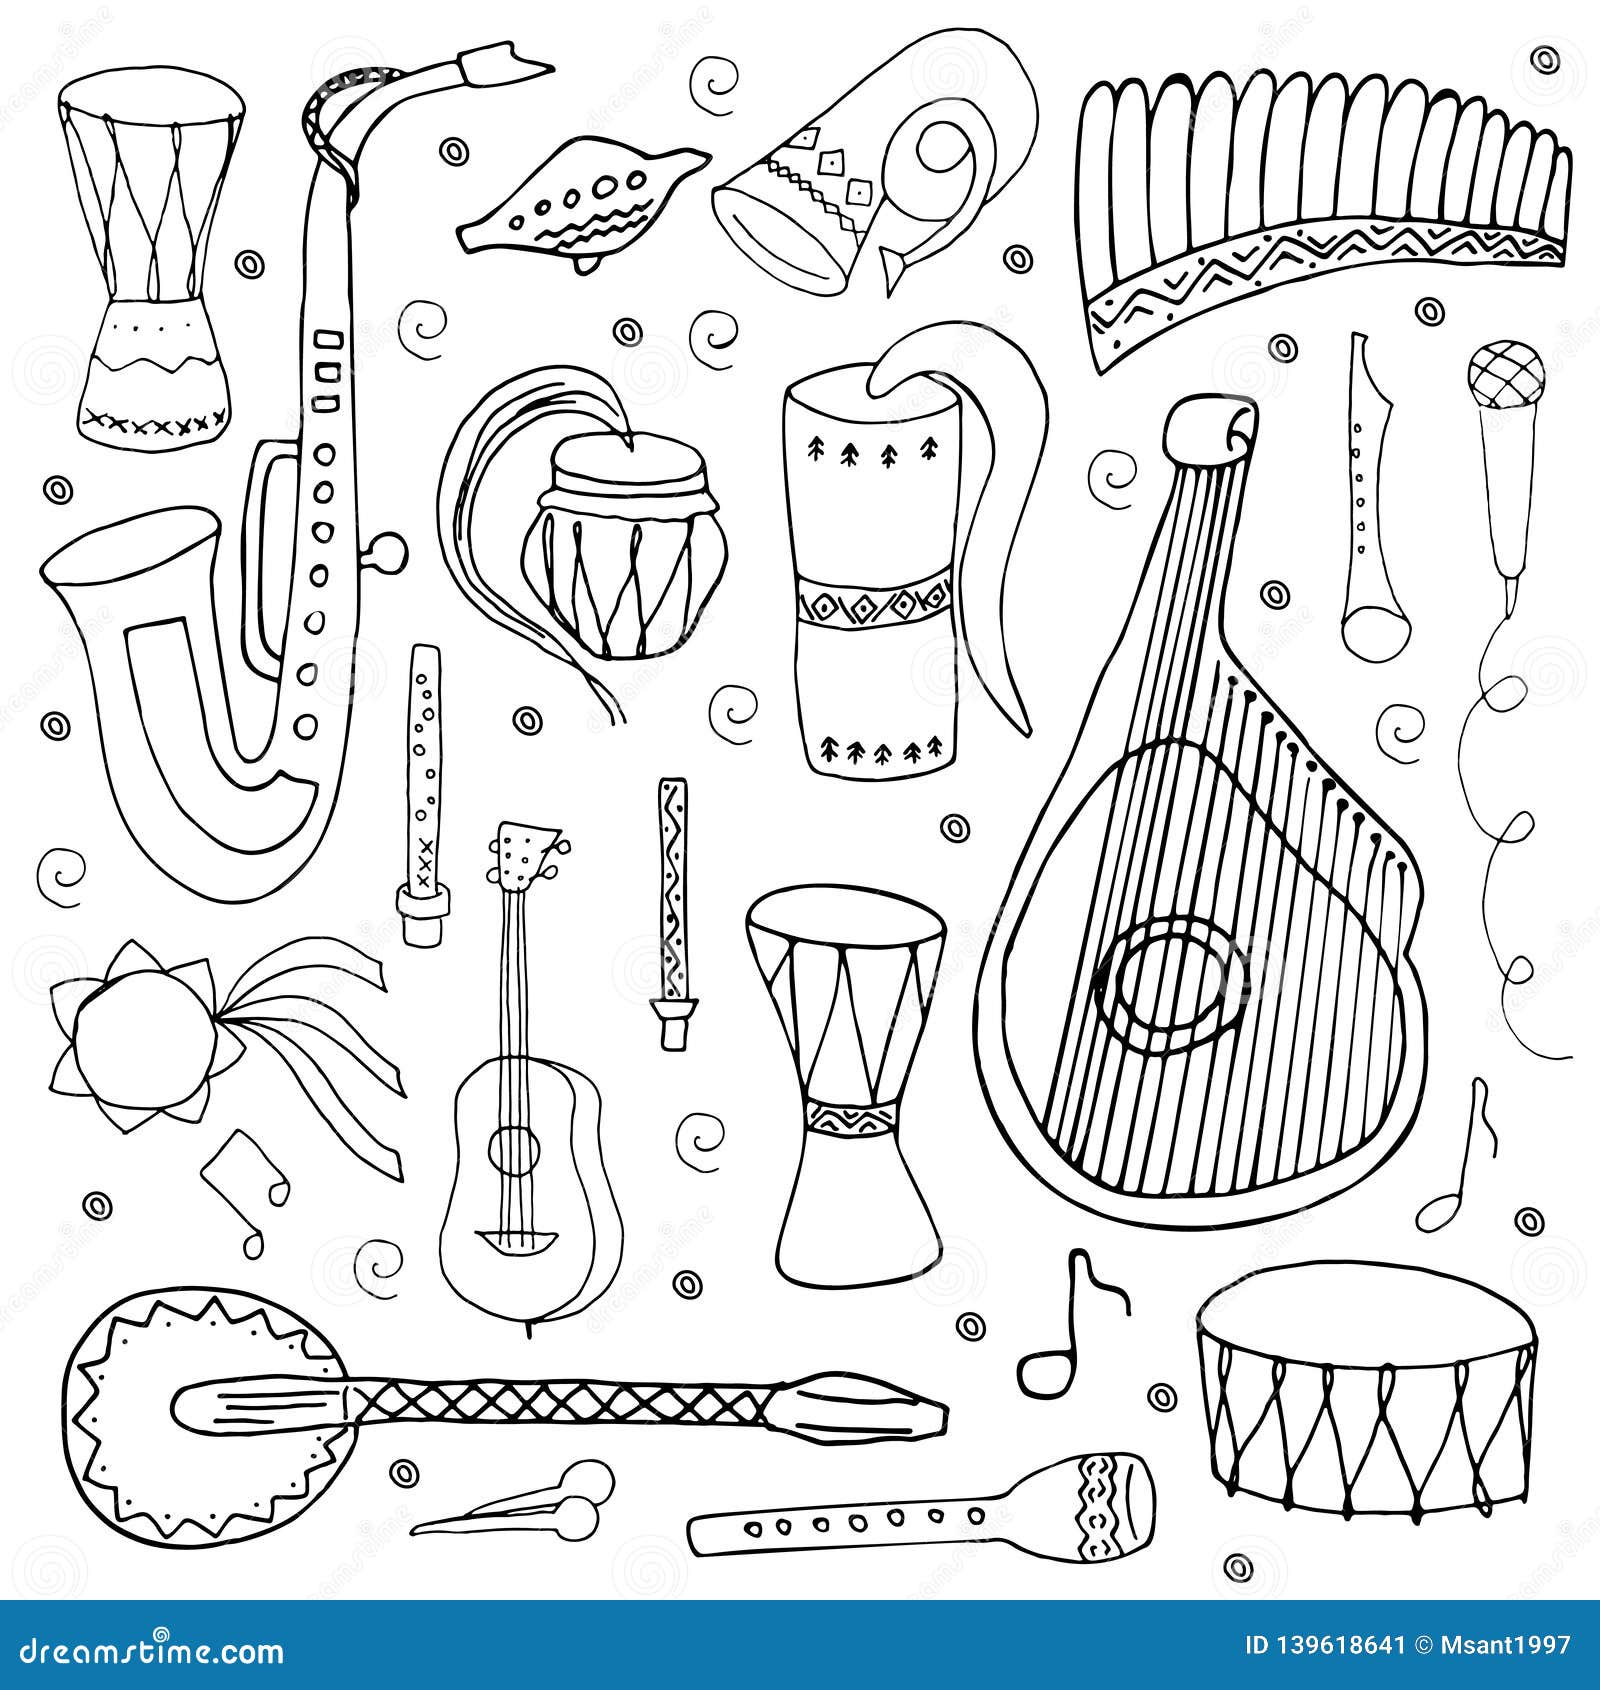 Doodle music instruments. Hand drawn doodle music instruments and objects.  | CanStock